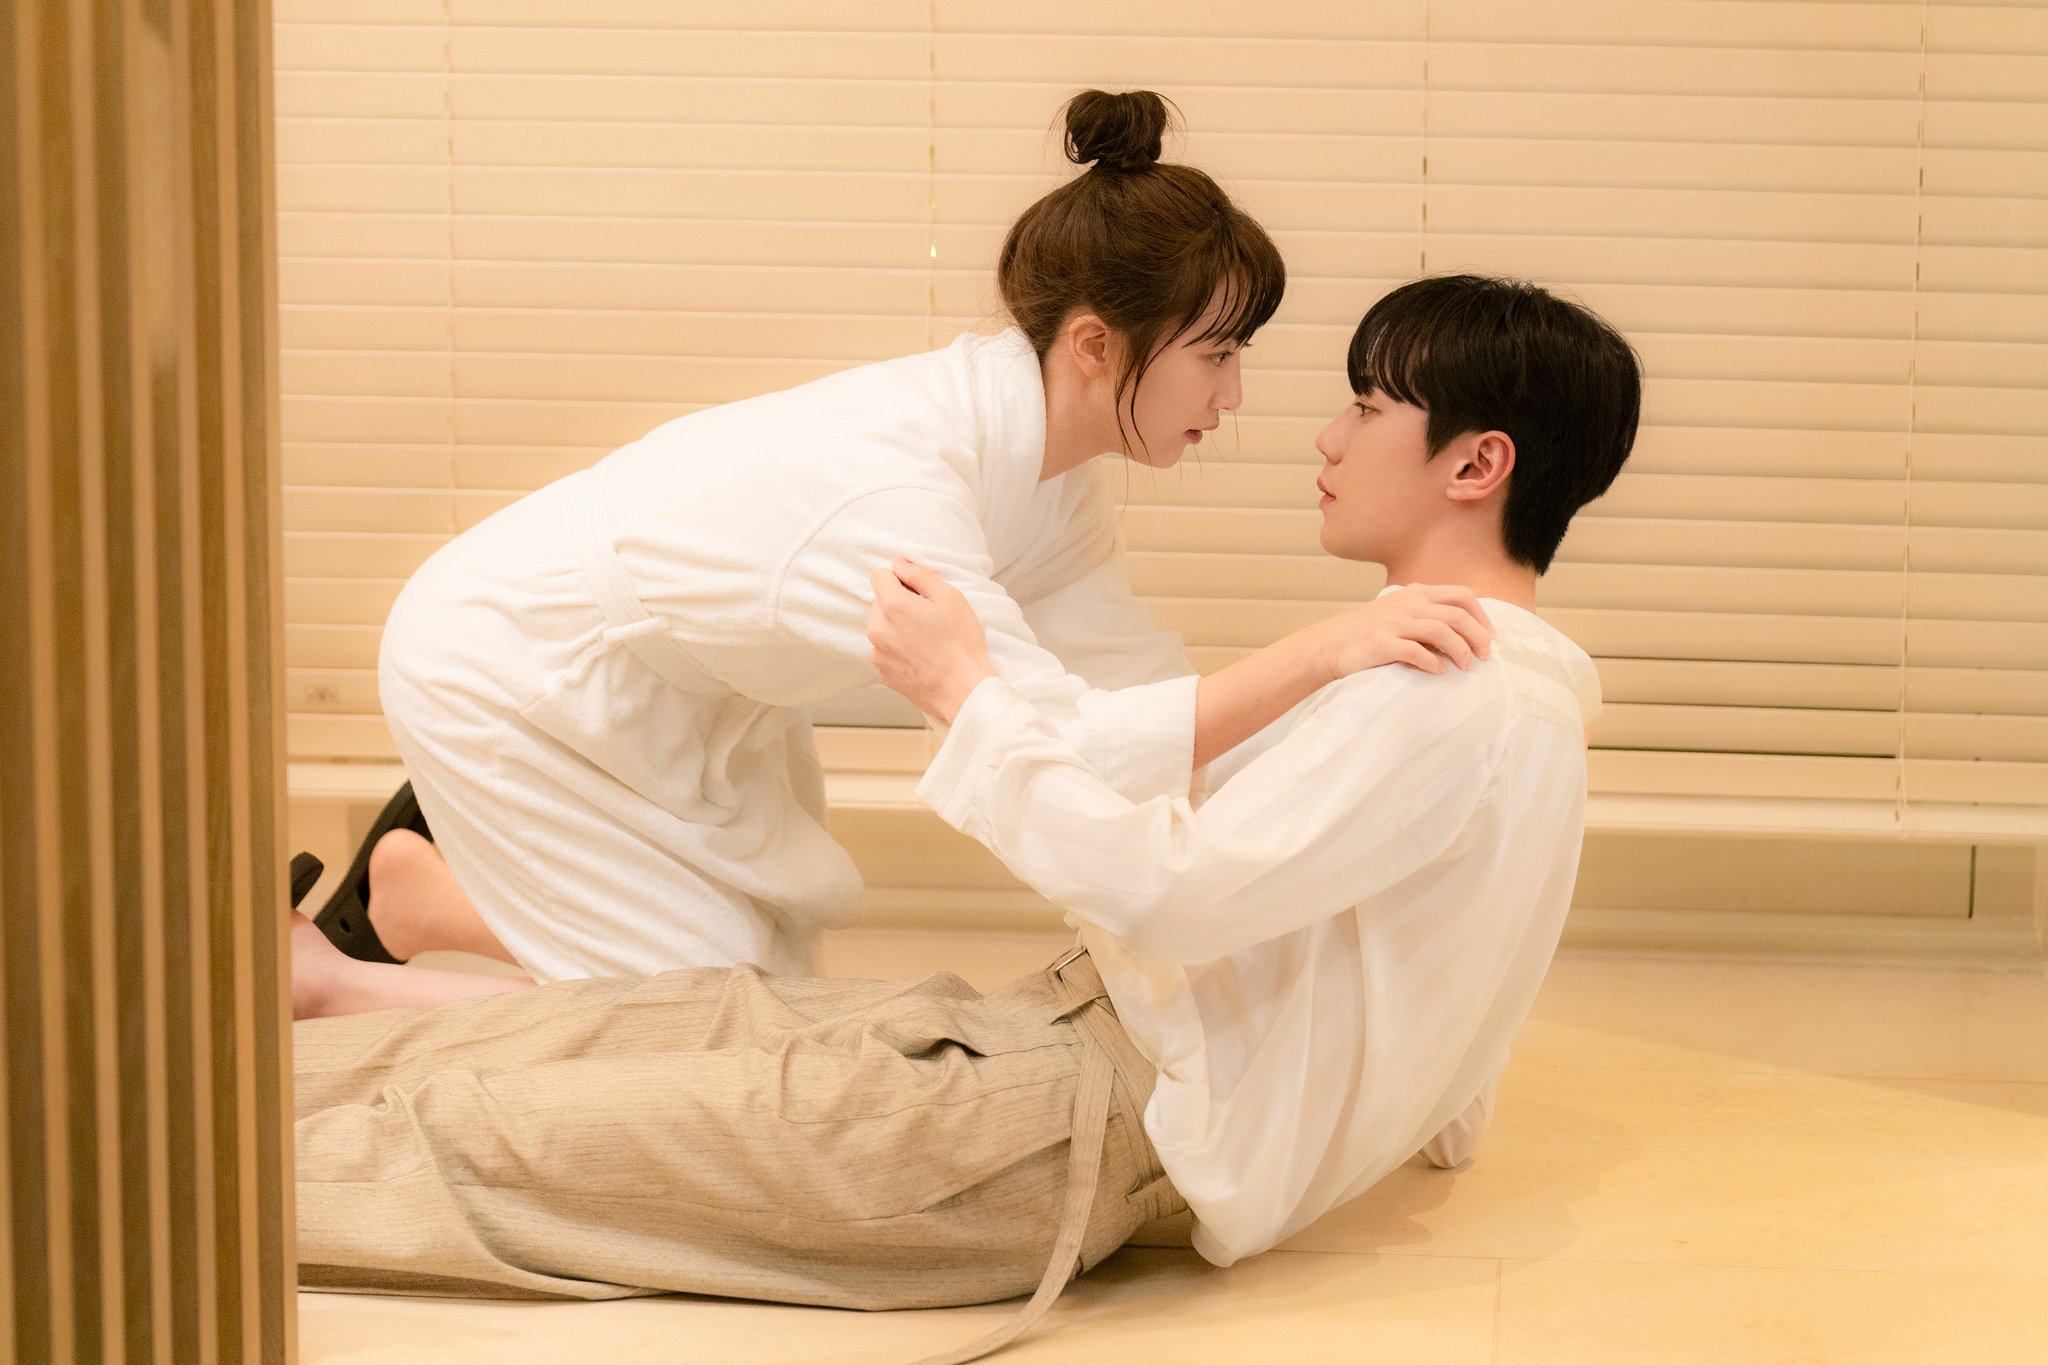 Pyo Ye-jin (left) as main character Shin Jae-rim and Lee Jun-young as chaebol heir Moon Chae-min in a still from Dreaming of a Freaking Fairy Tale.